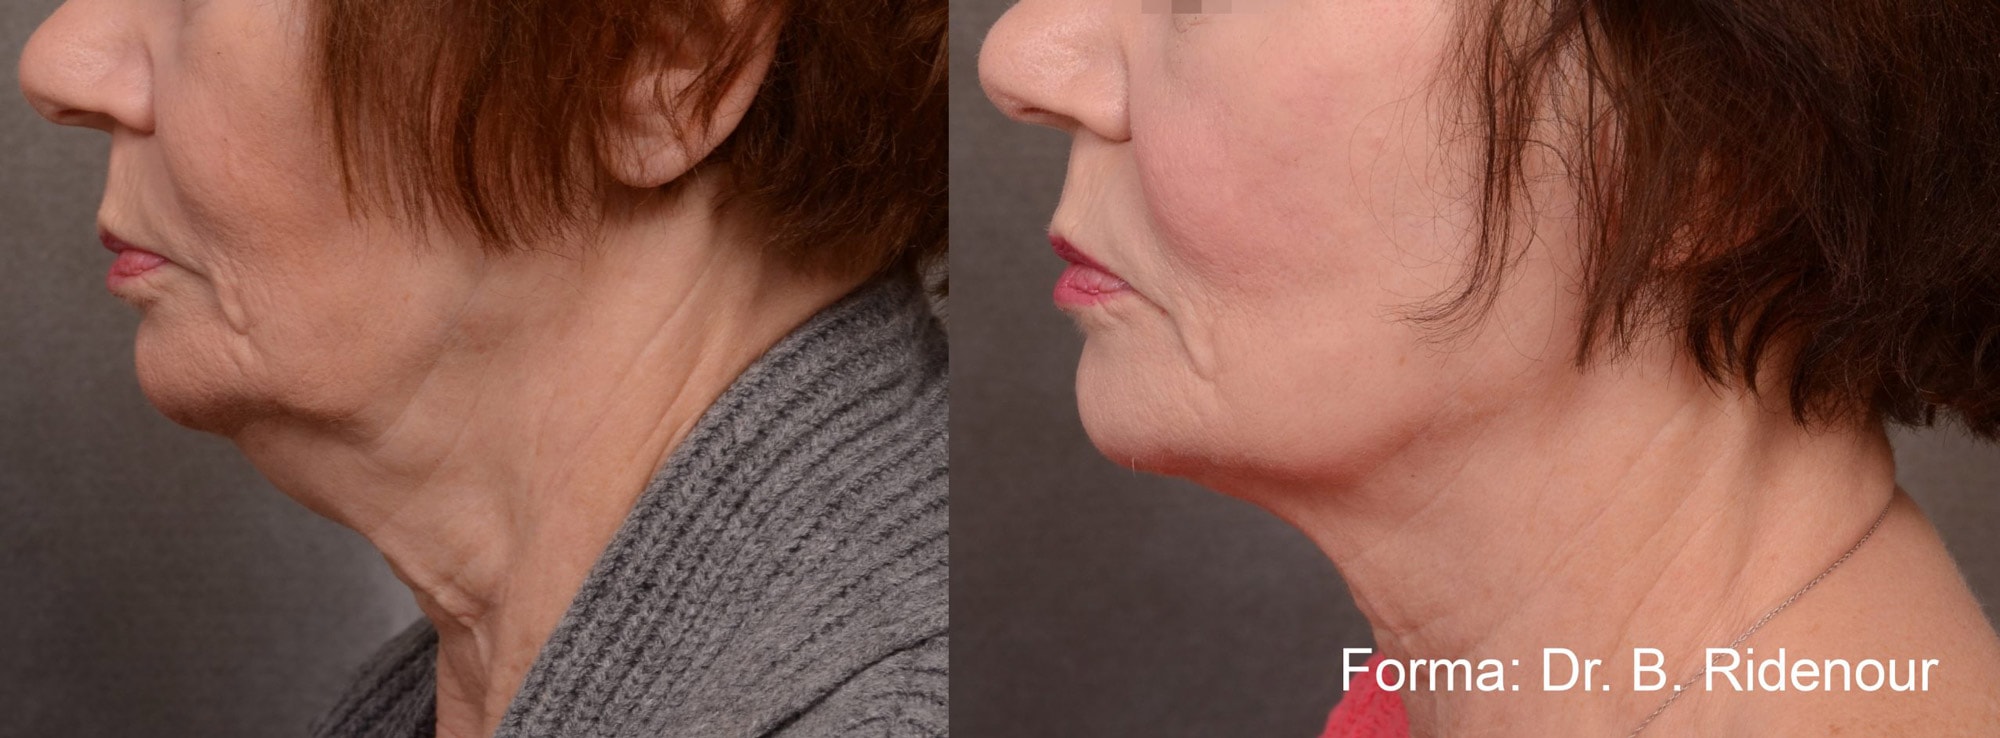 Before and After photos of Forma treatments tightening loose skin and contouring a woman’s neck and chin